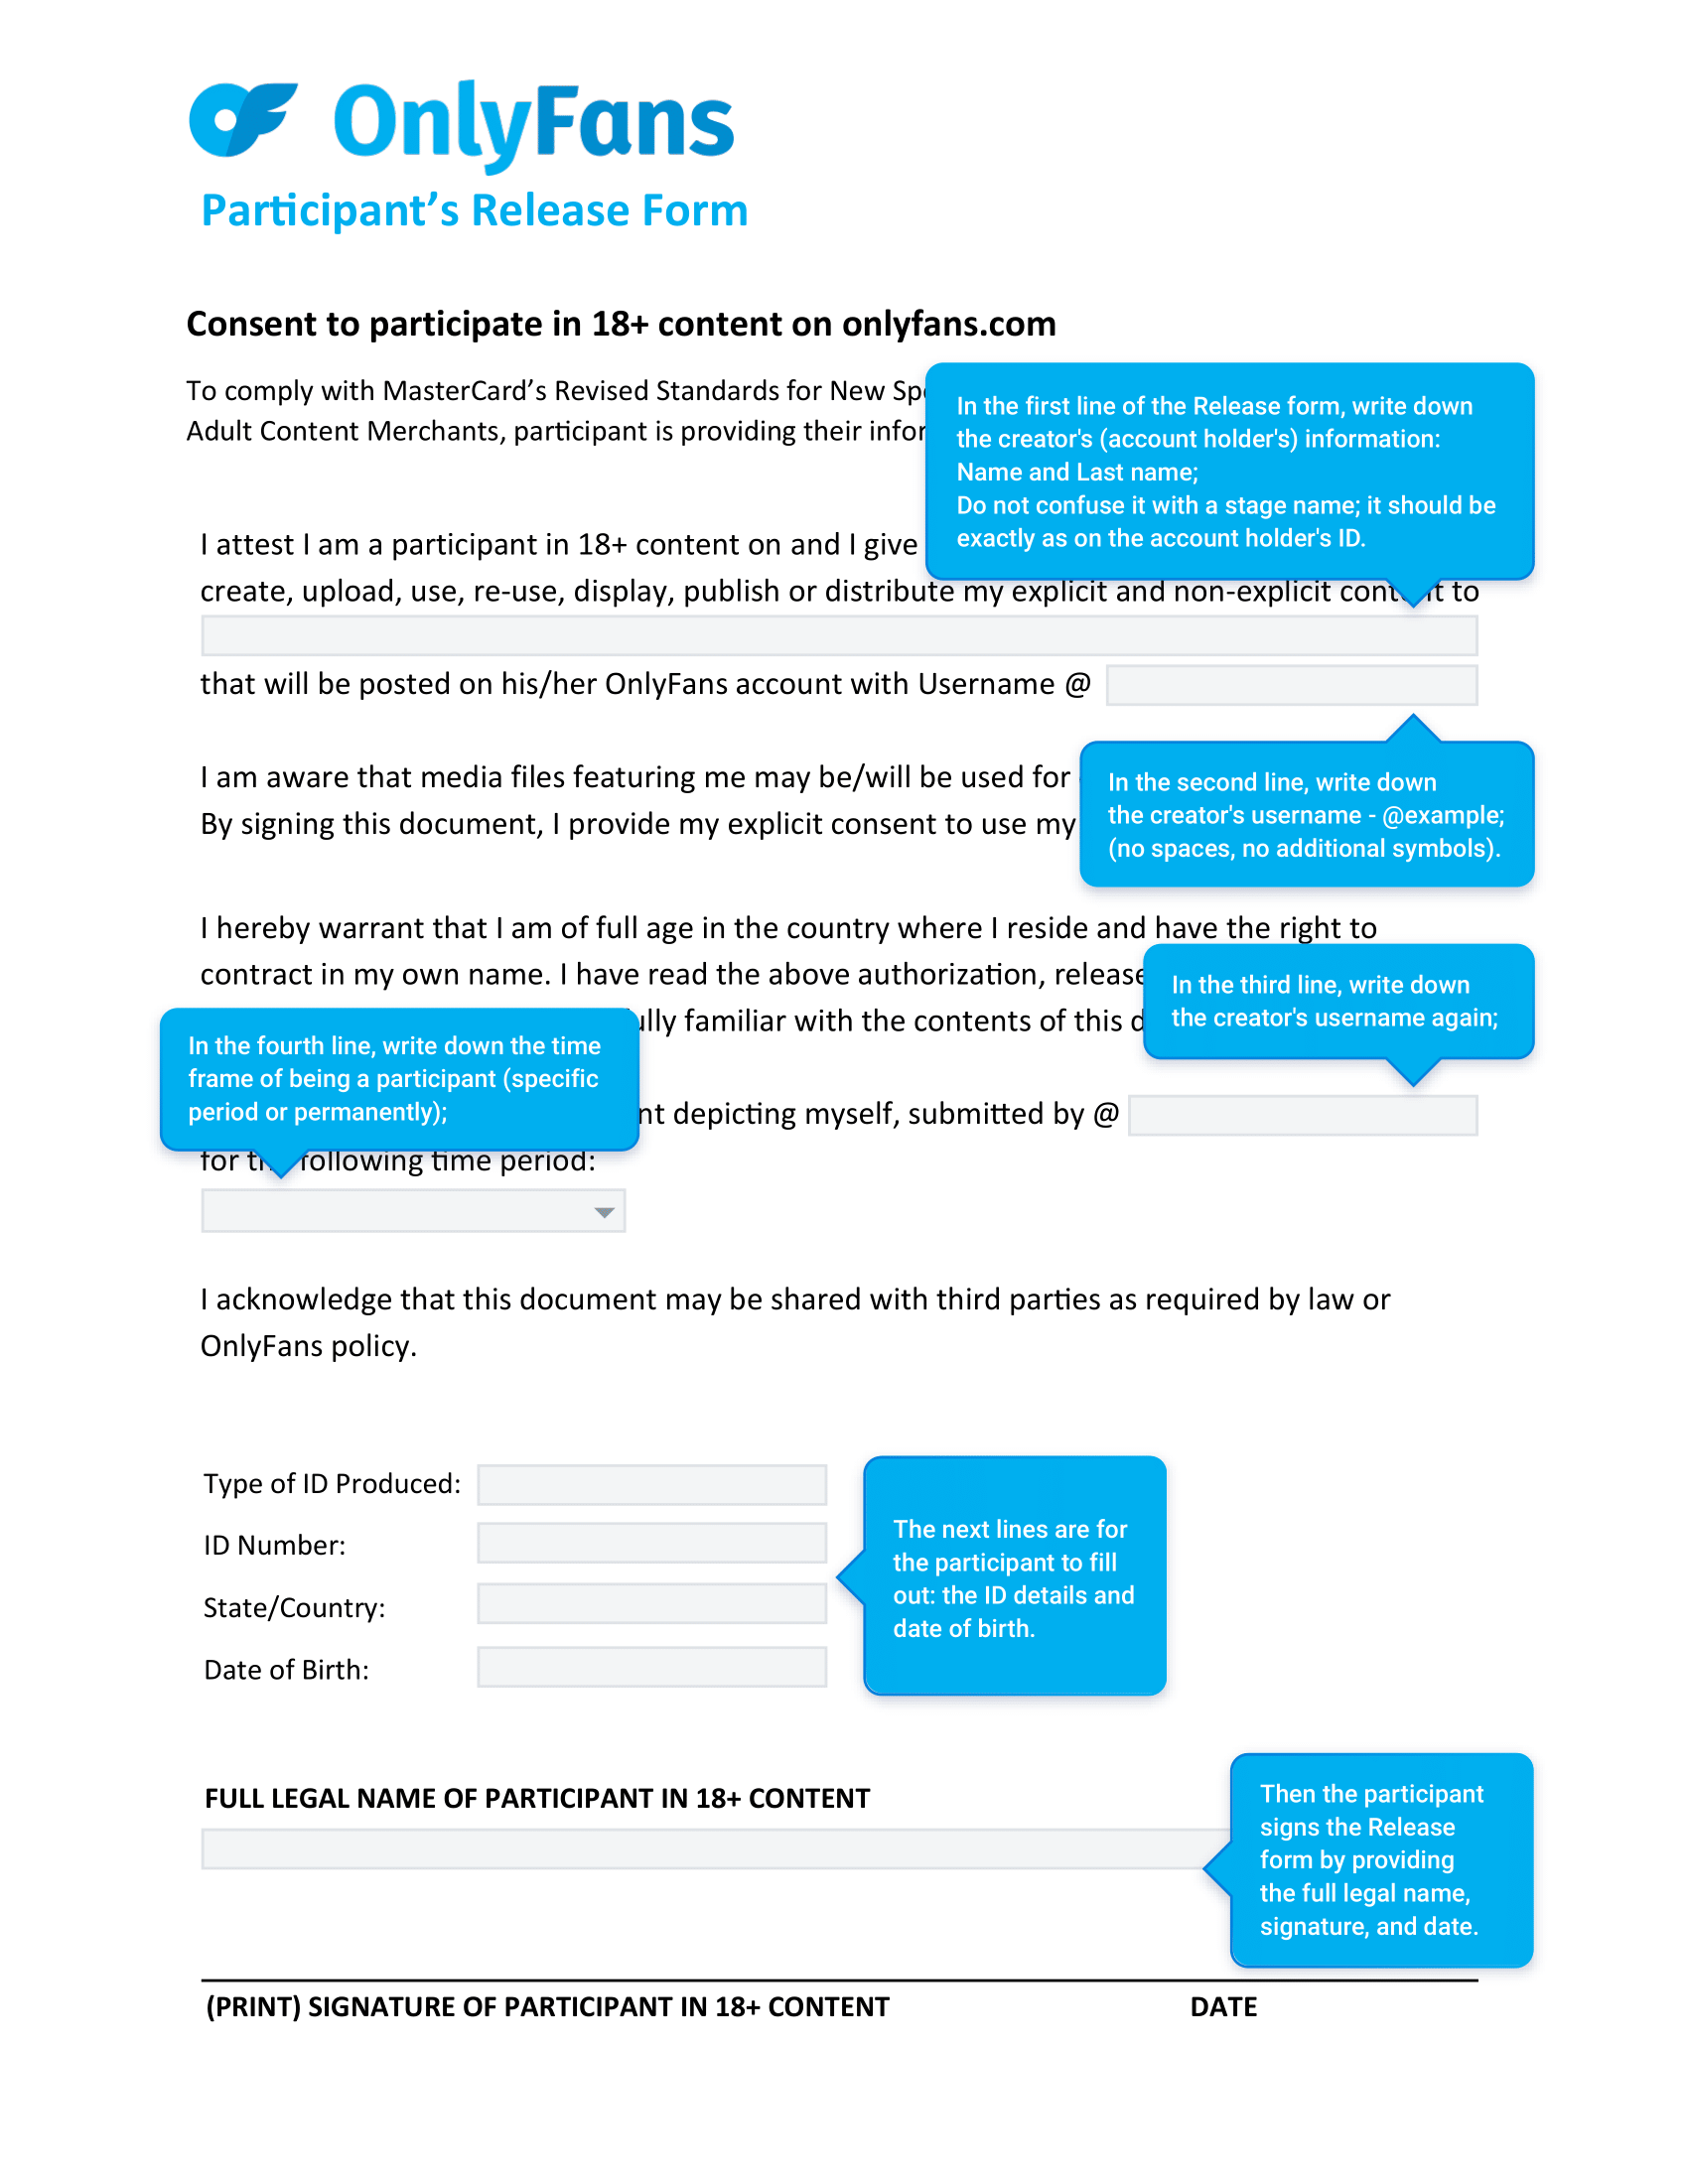 How To Fill Out OnlyFans Release Form PDF